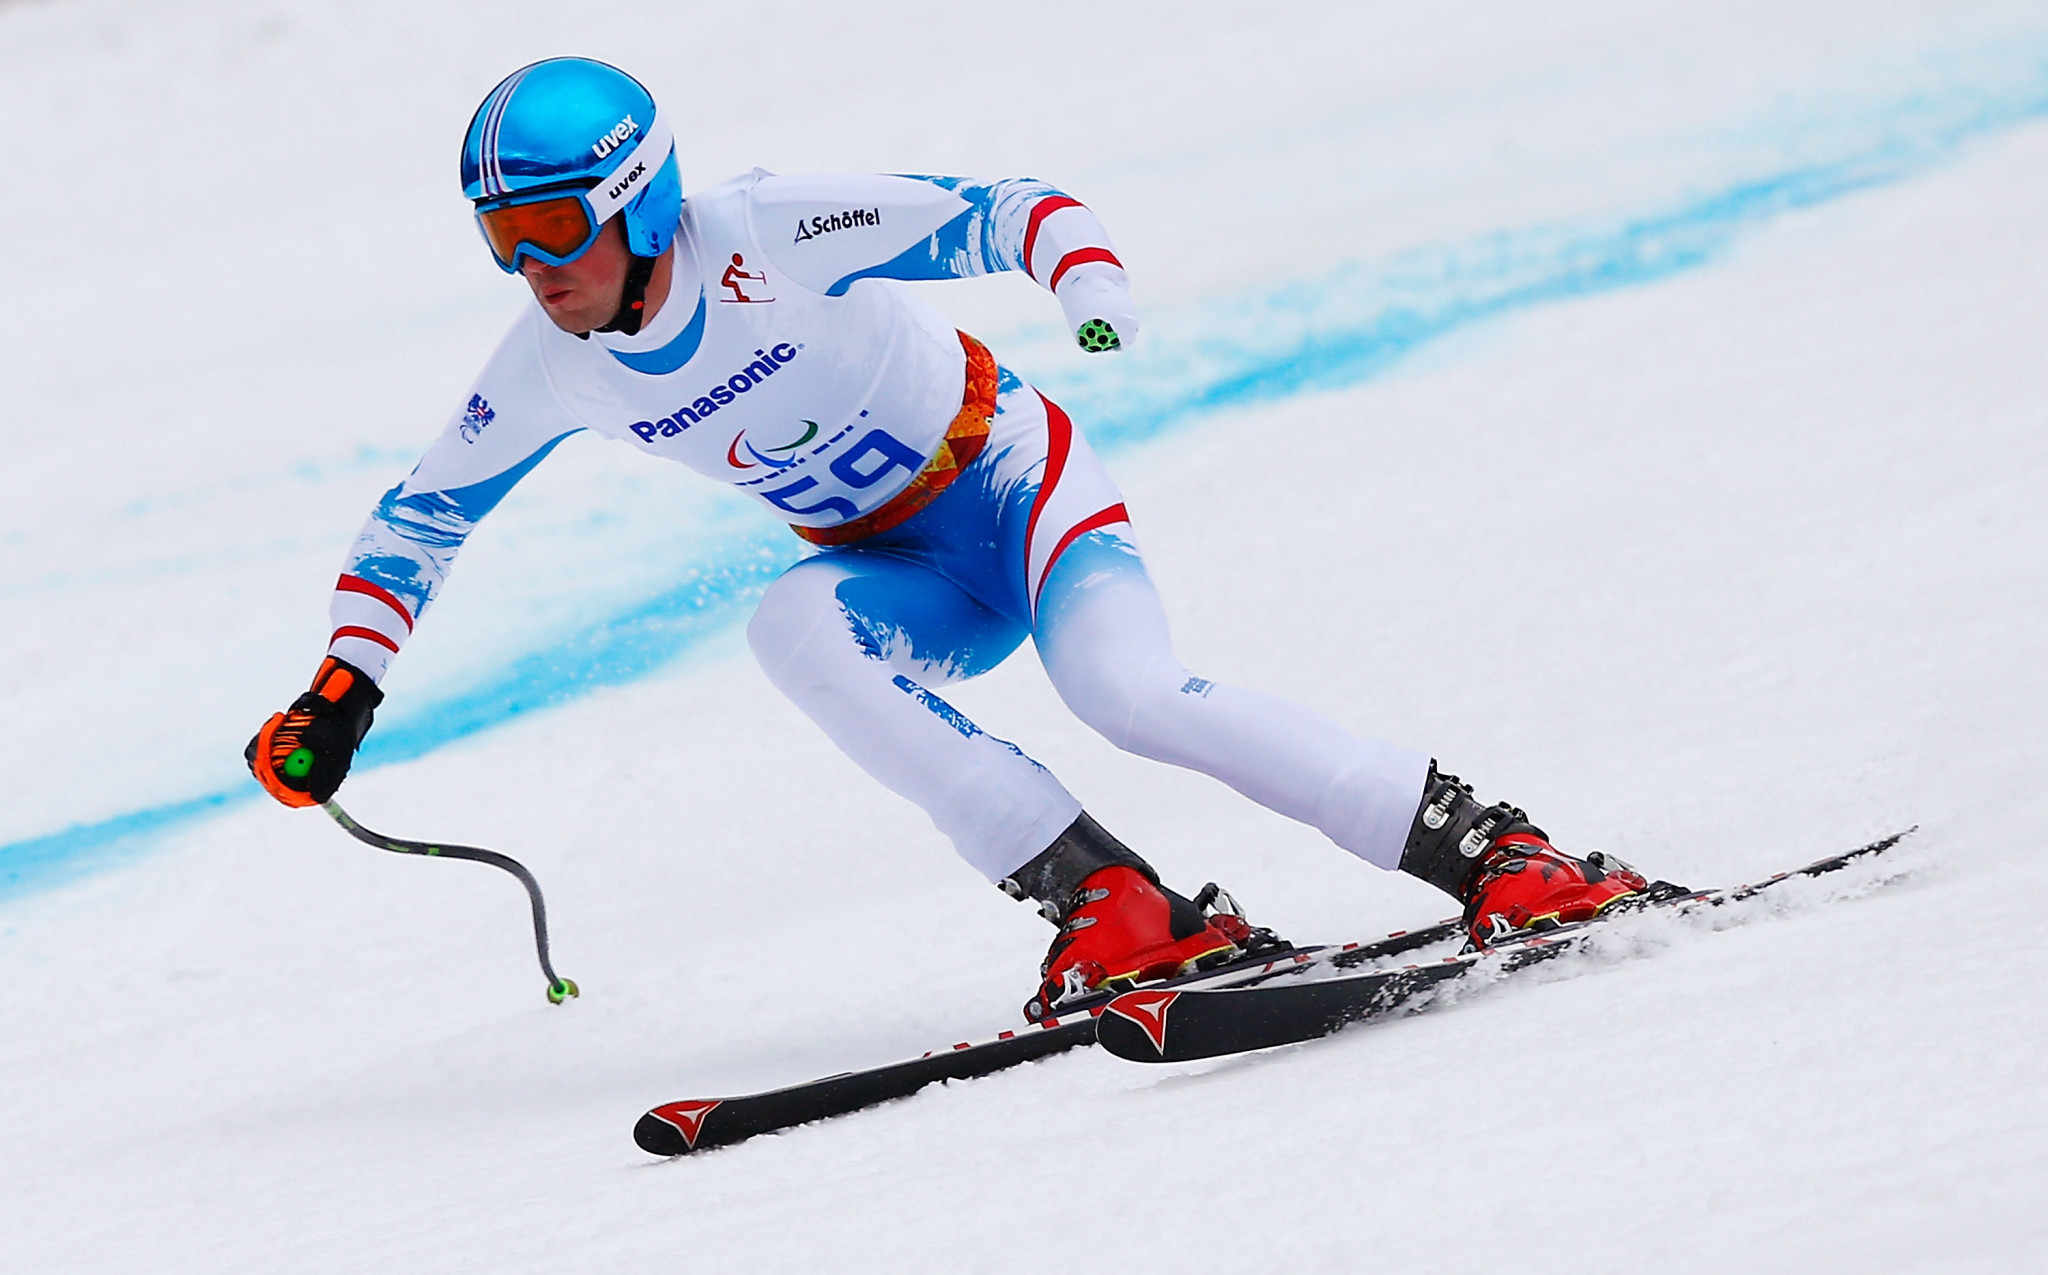 Wuerz and Loesch gain slalom wins at World Para Alpine Skiing World Cup in Zagreb